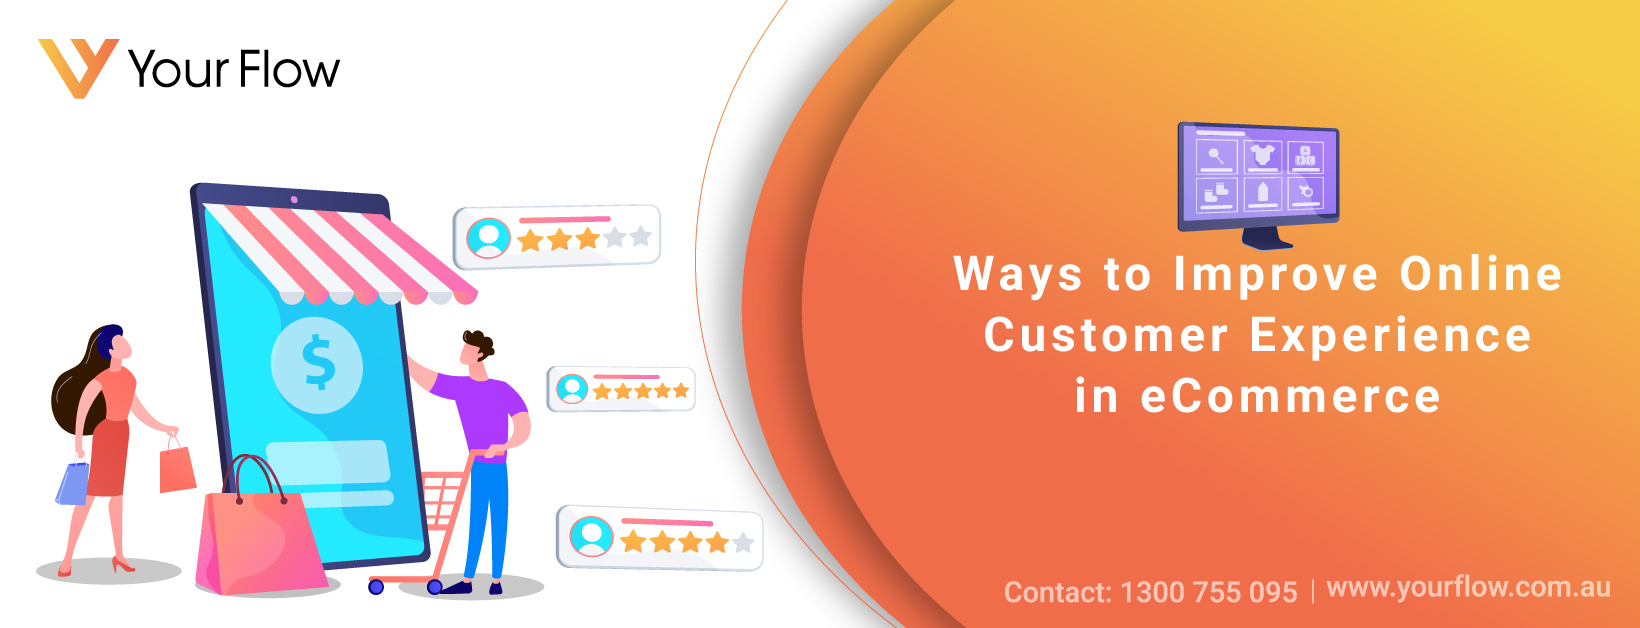 Ways to Improve Online Customer Experience in eCommerce